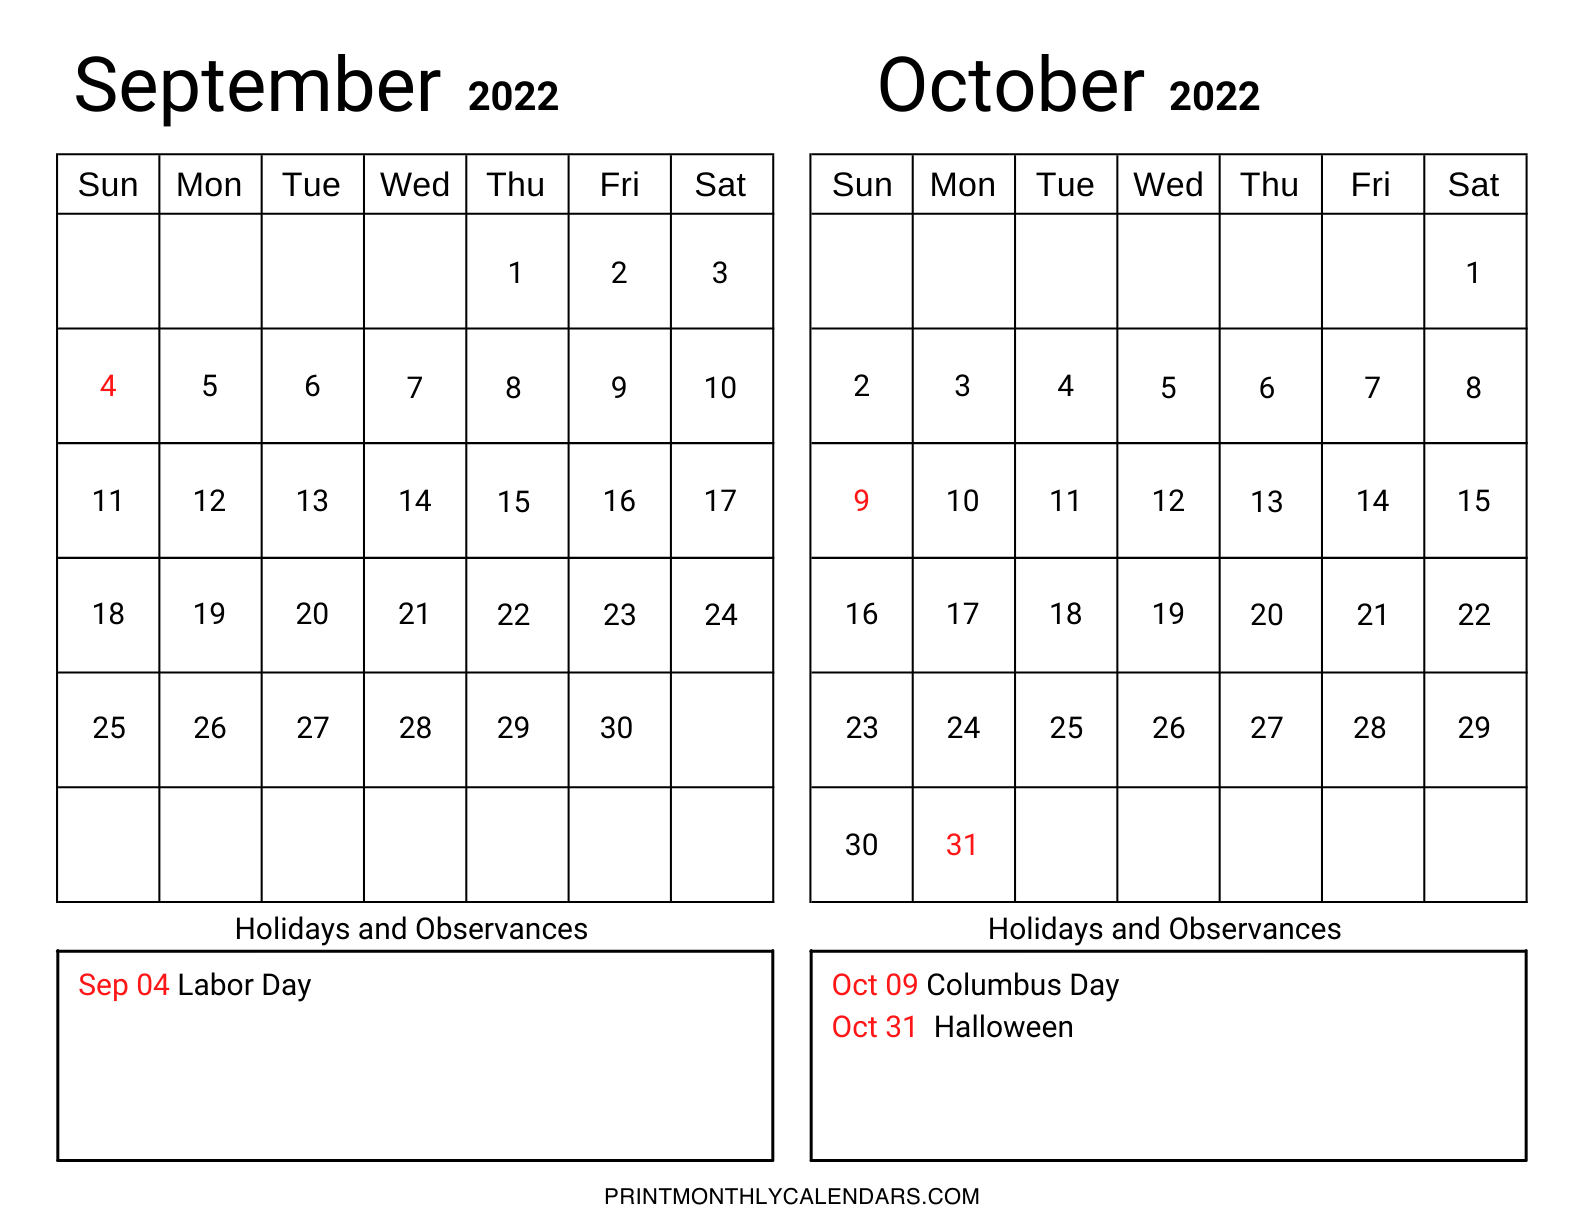 The September October 2022 calendar template is a one-pager with a landscape layout and a list of US holidays and observances written below the grid.